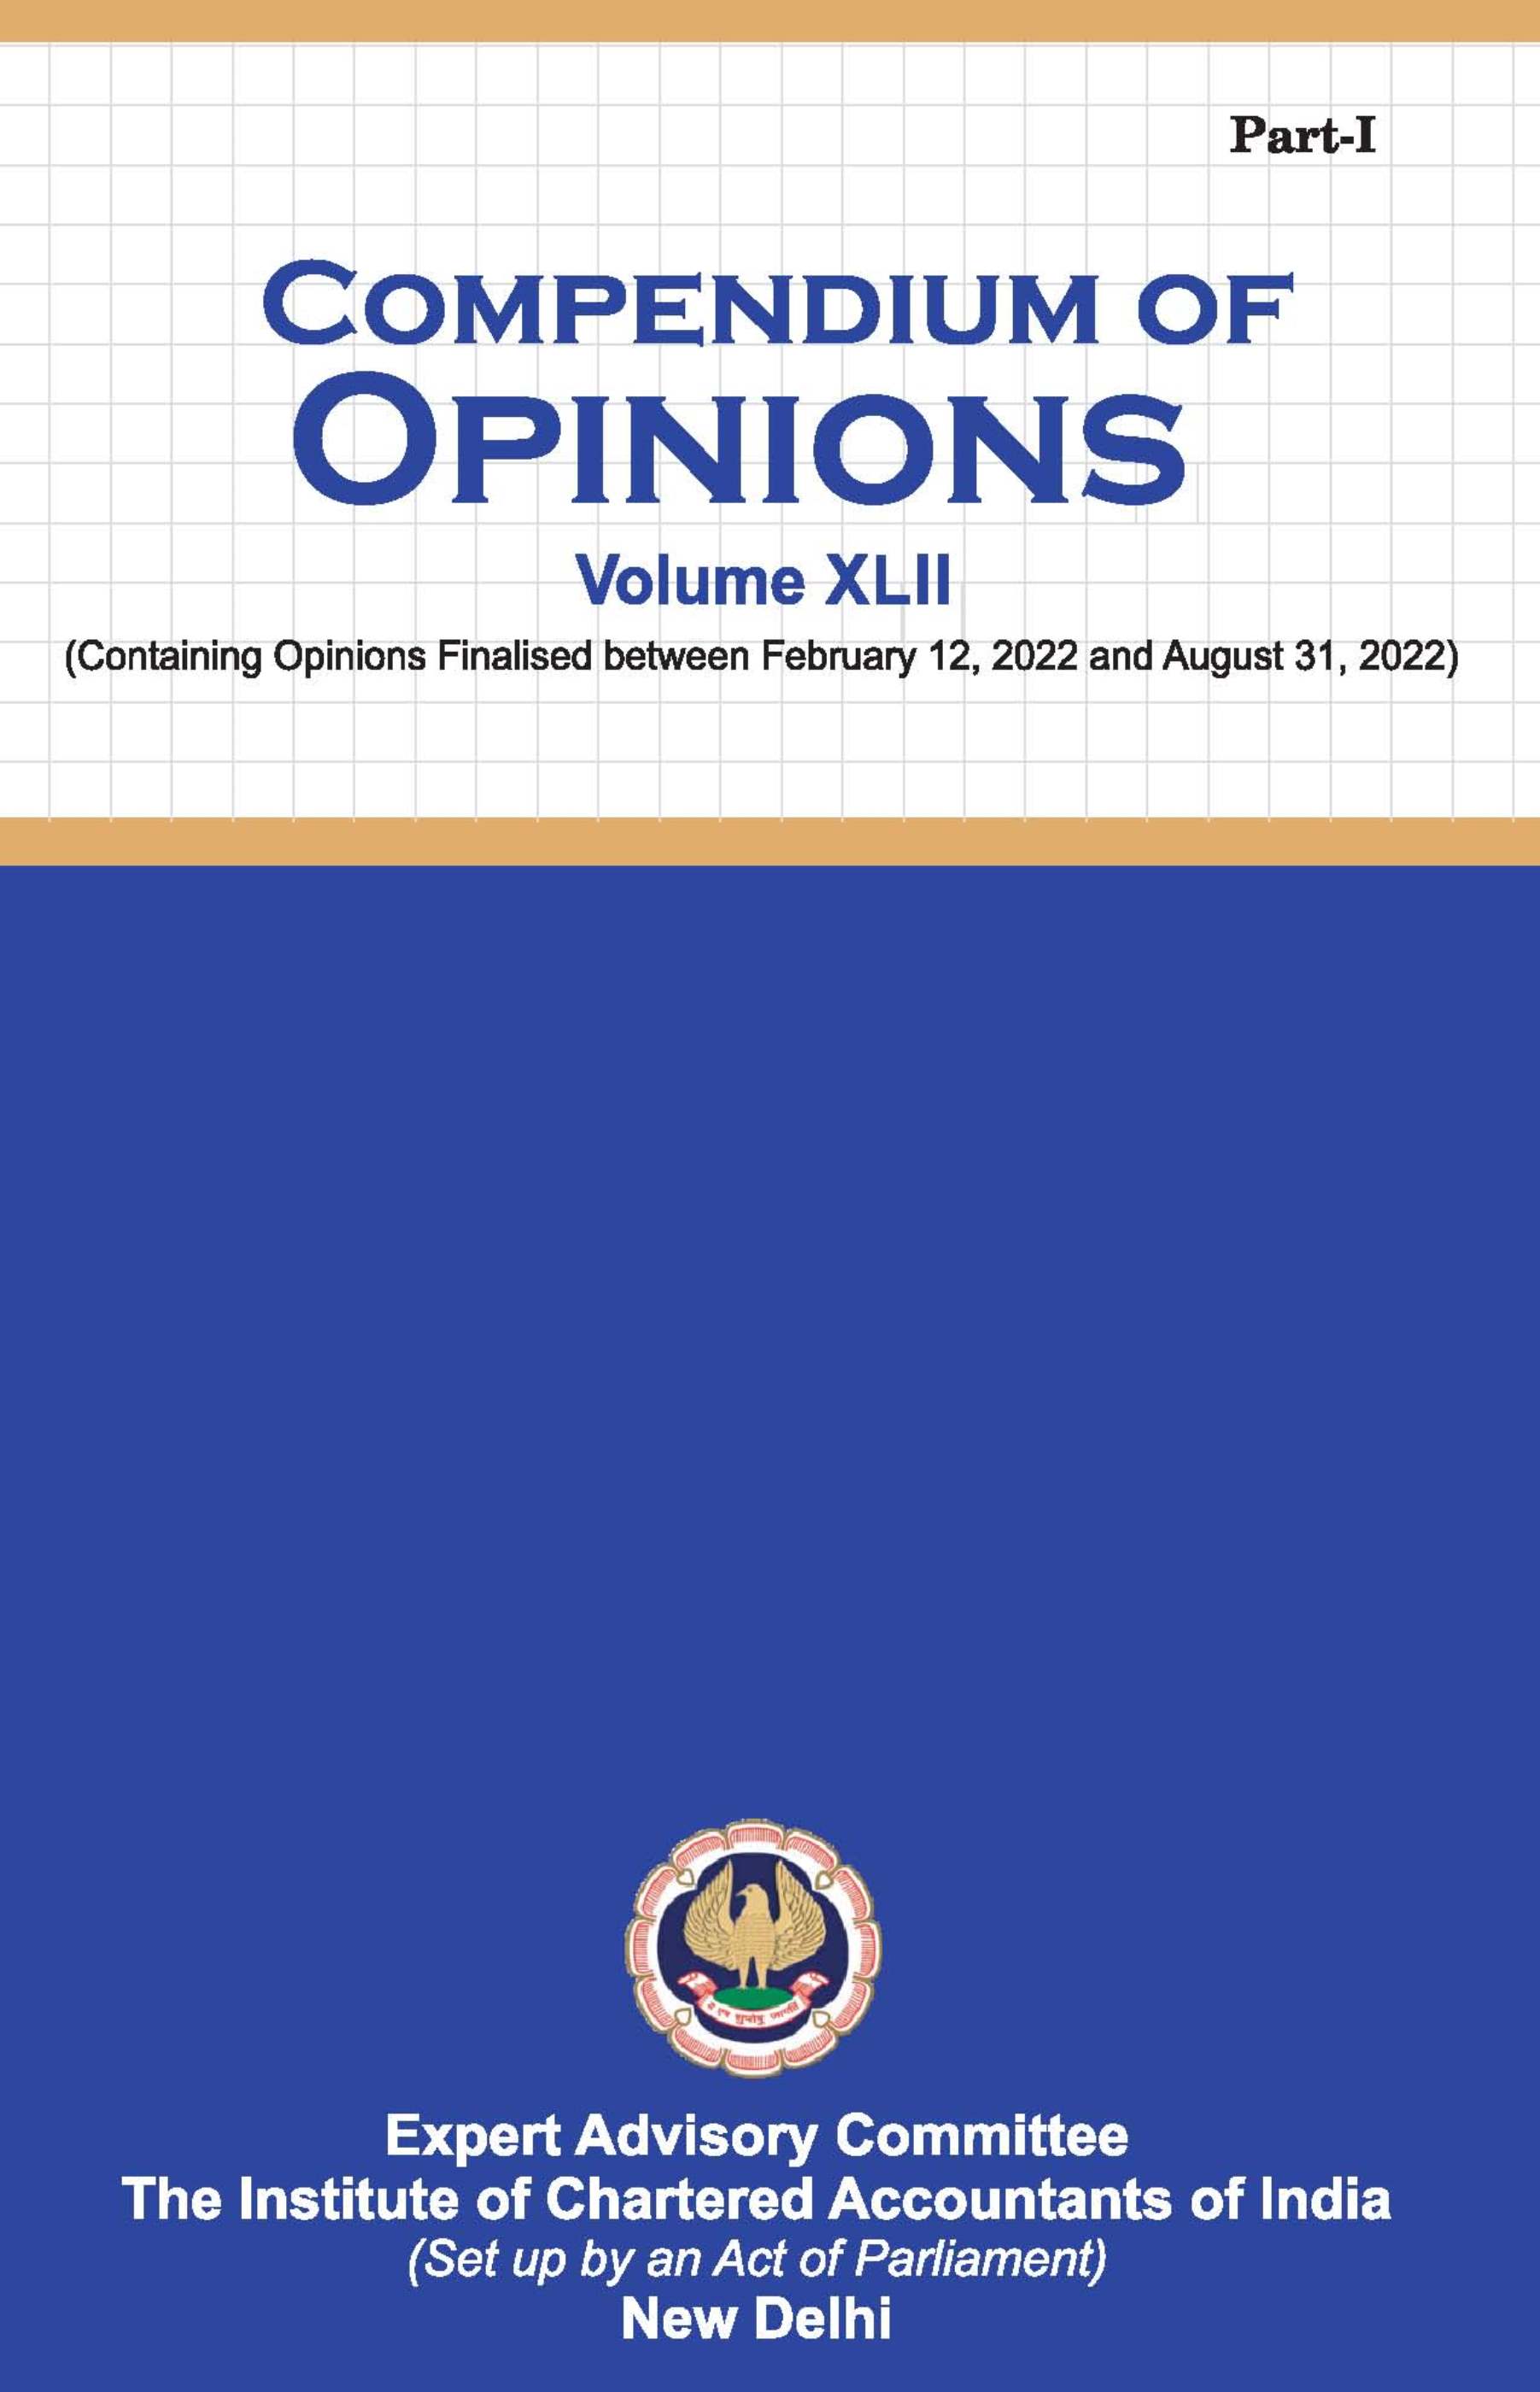 Compendium of Opinions - Volume - XLII (Part - I) - February, 2023 (Containing Opinions Finalised between February 12, 2022 and August 31, 2022)